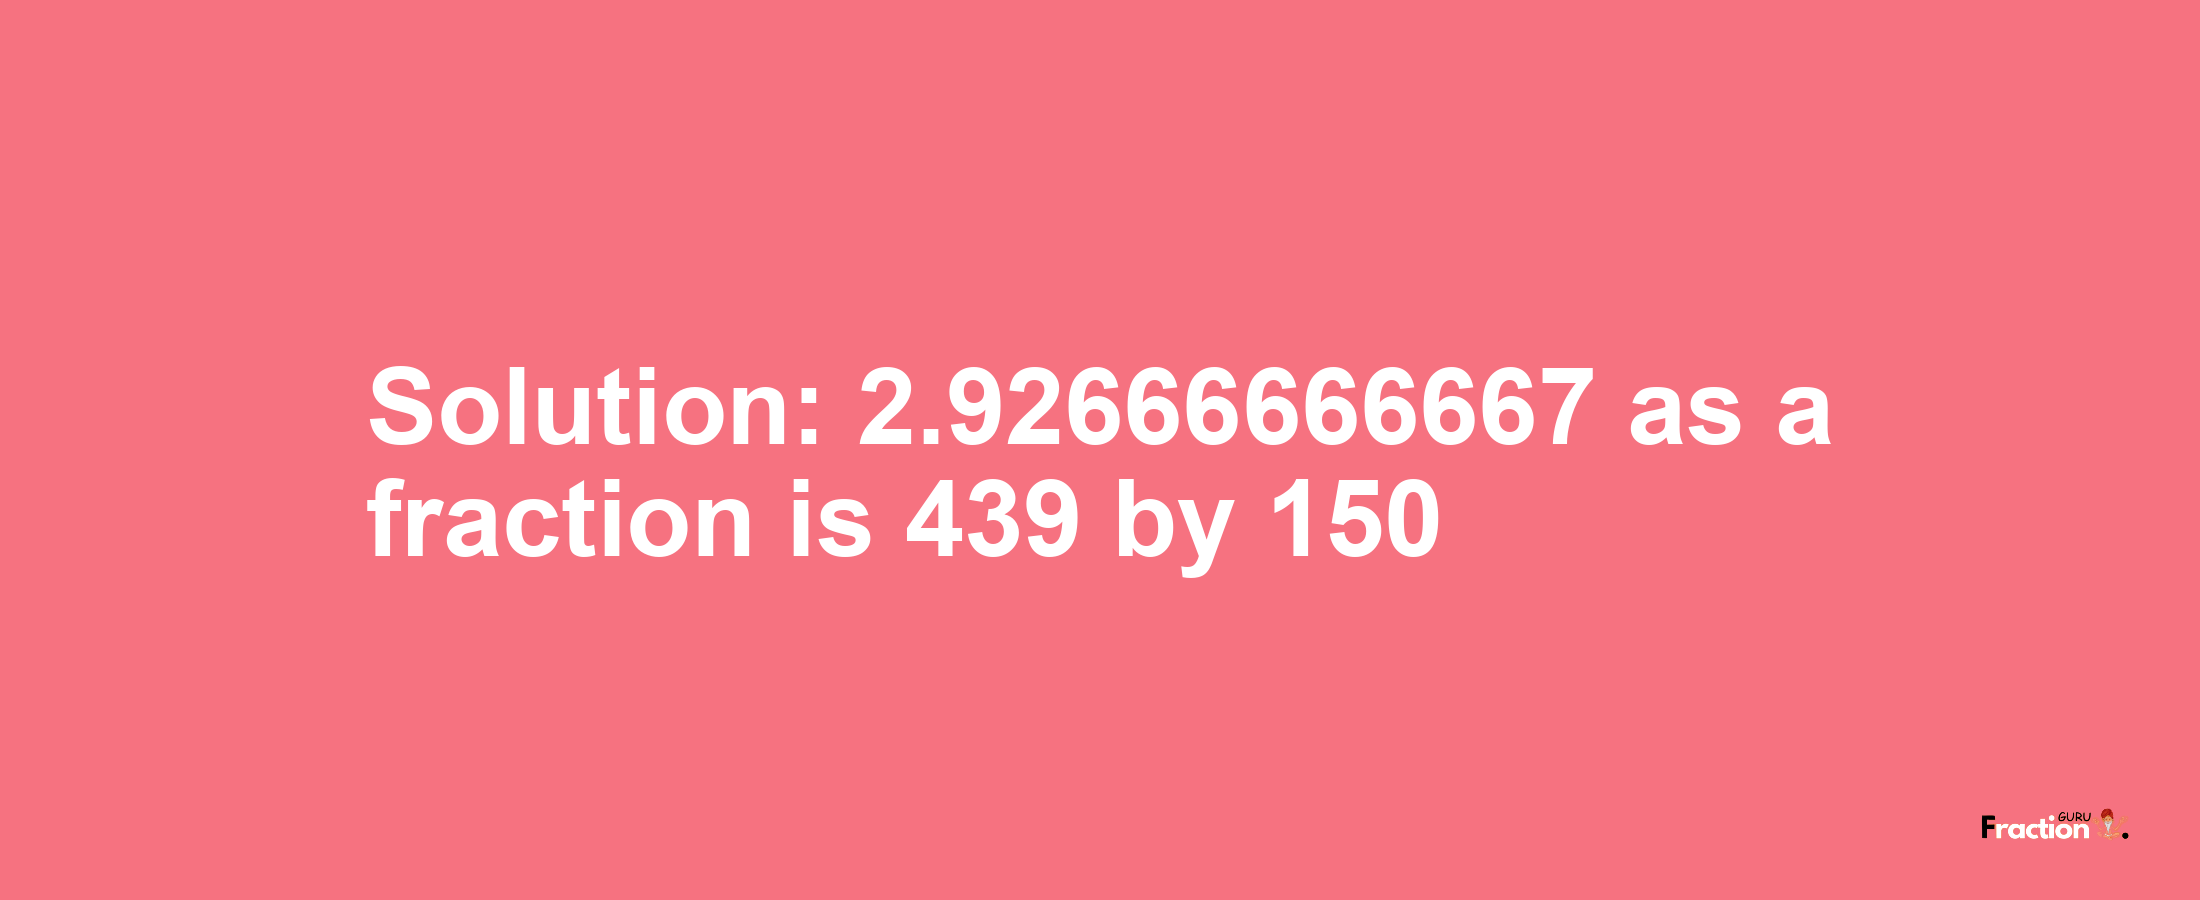 Solution:2.92666666667 as a fraction is 439/150